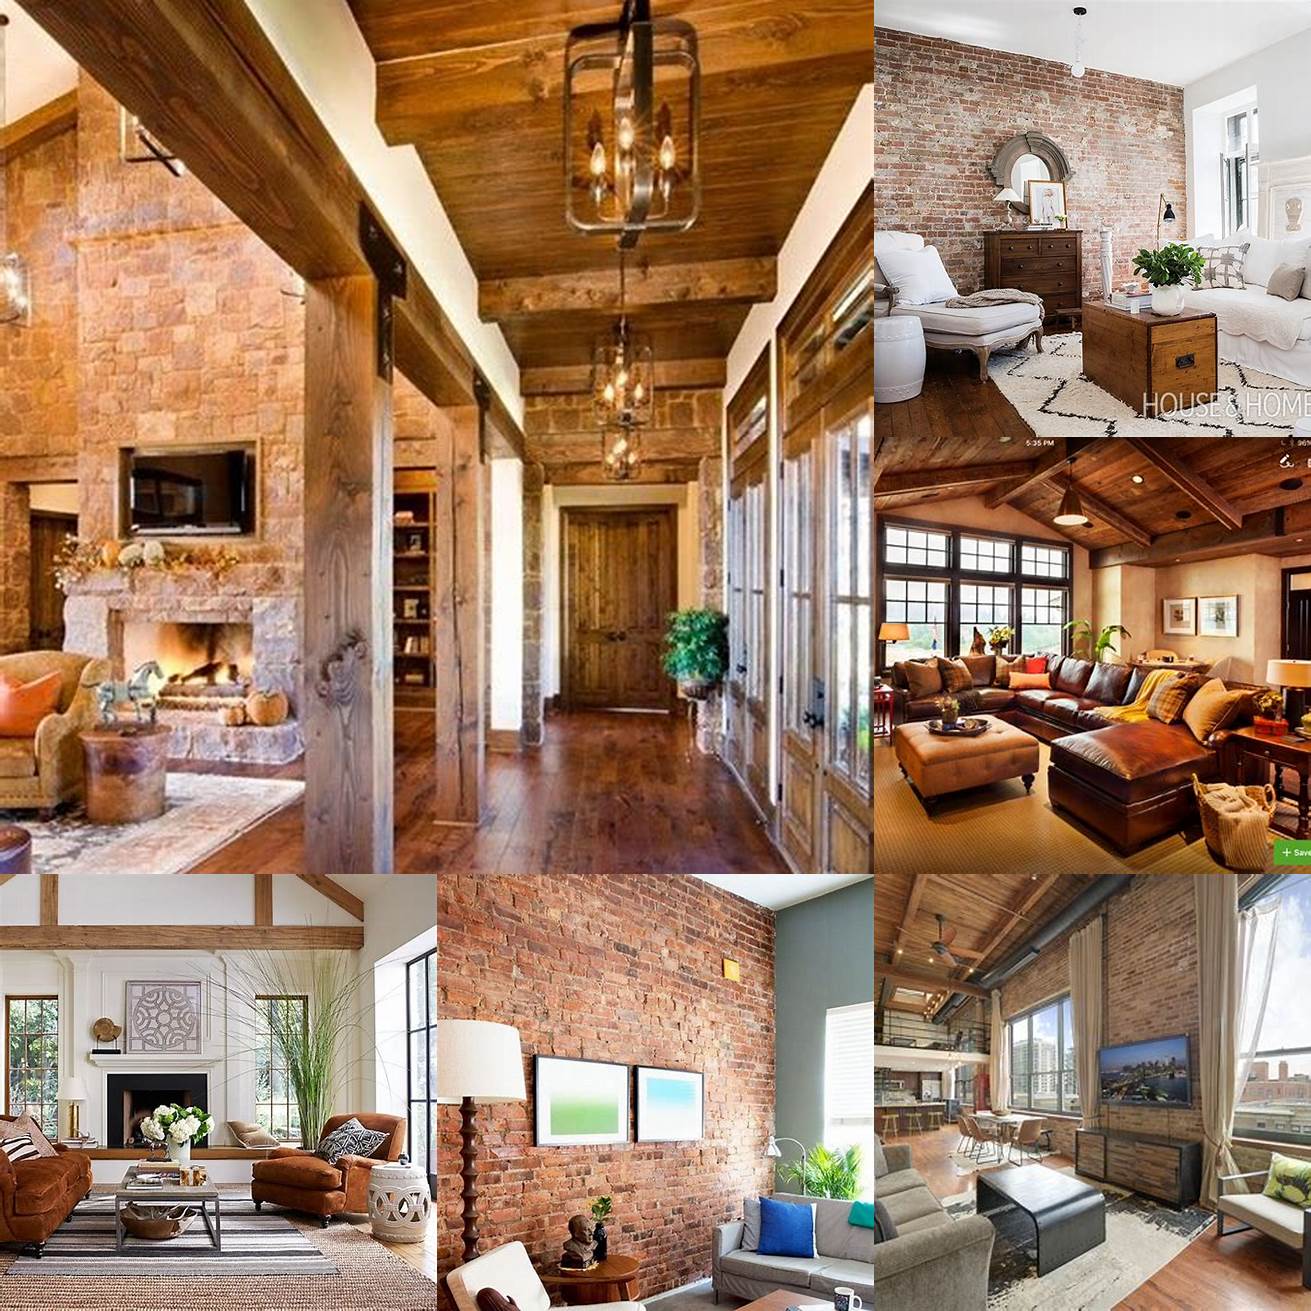 Rustic living room with exposed brick and natural wood accents